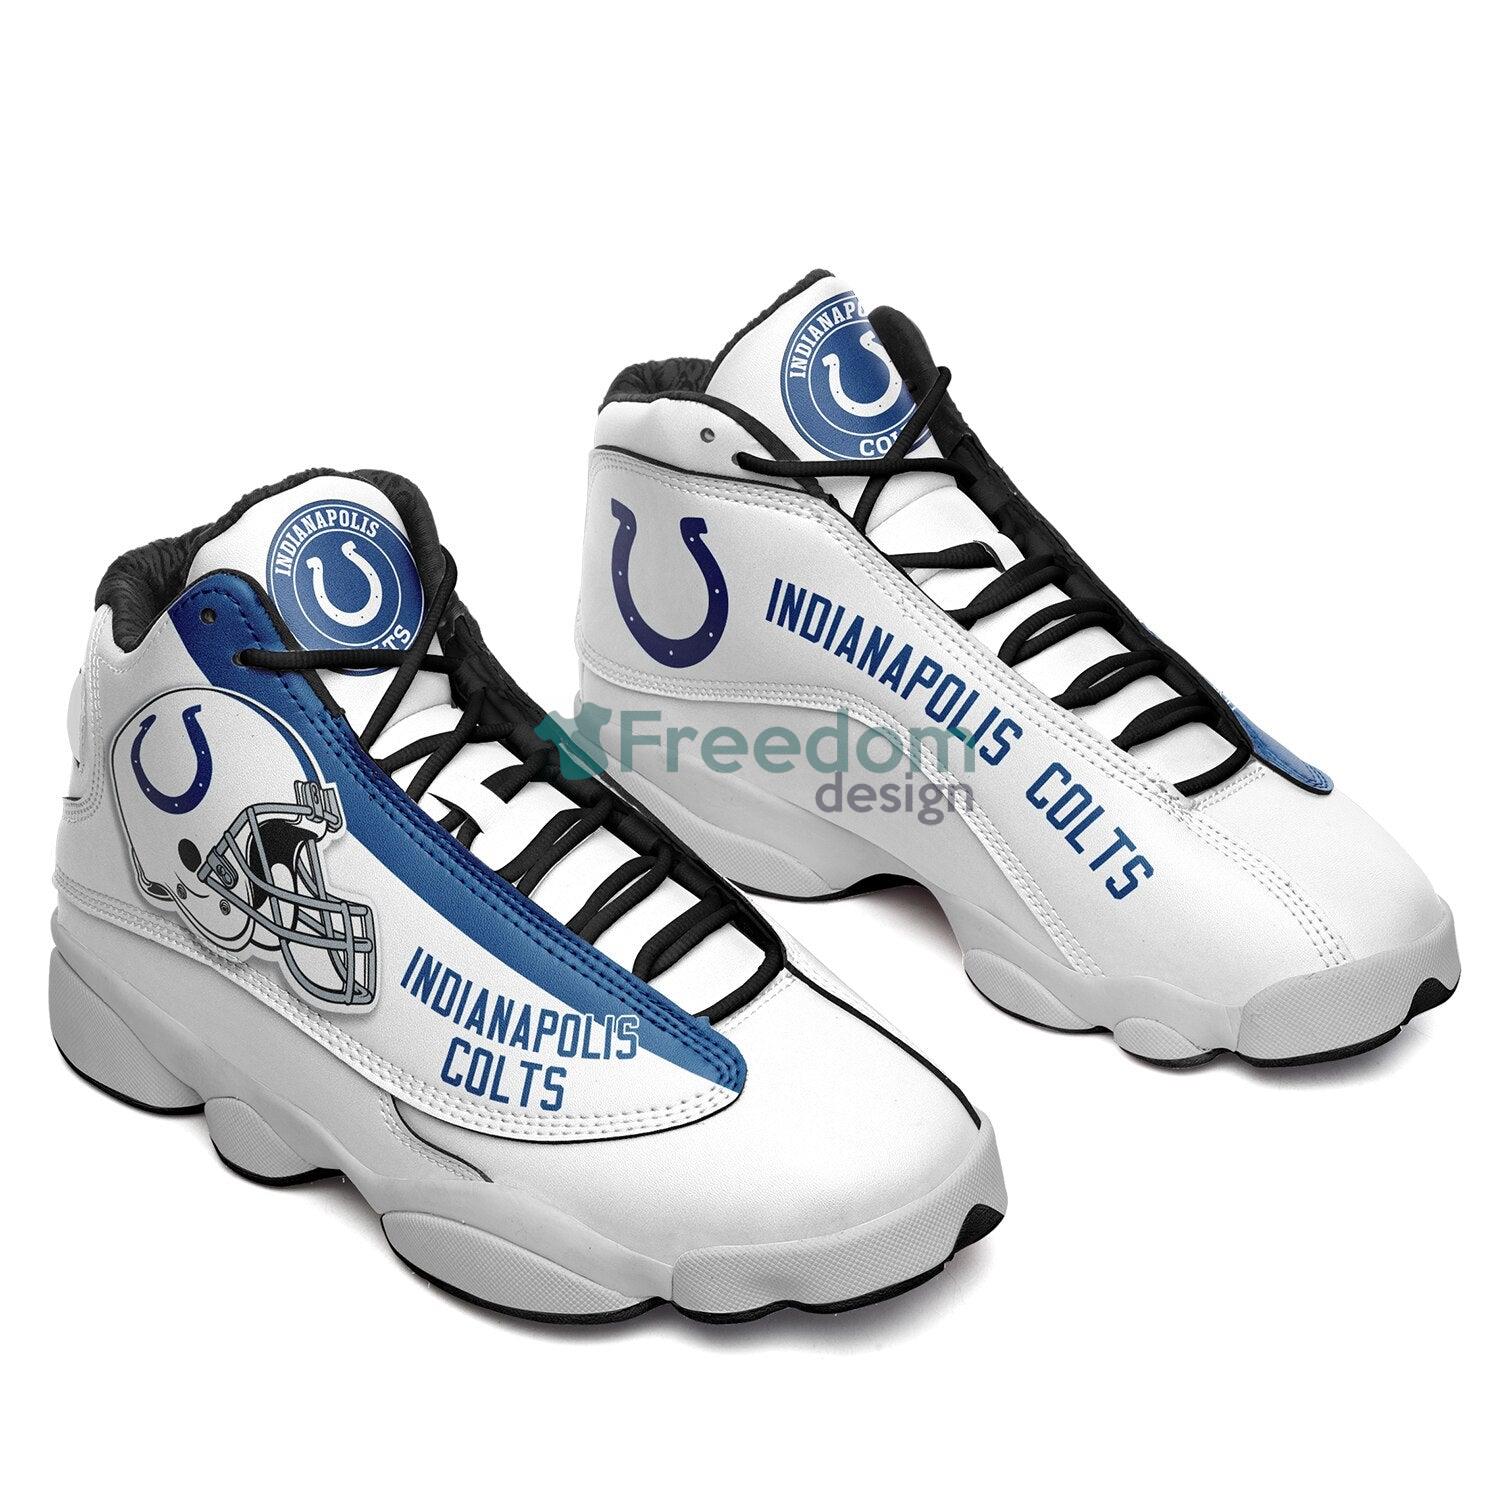 Indianapolis Colts Team Lover Air Jordan 13 Sneaker Shoes For Fans